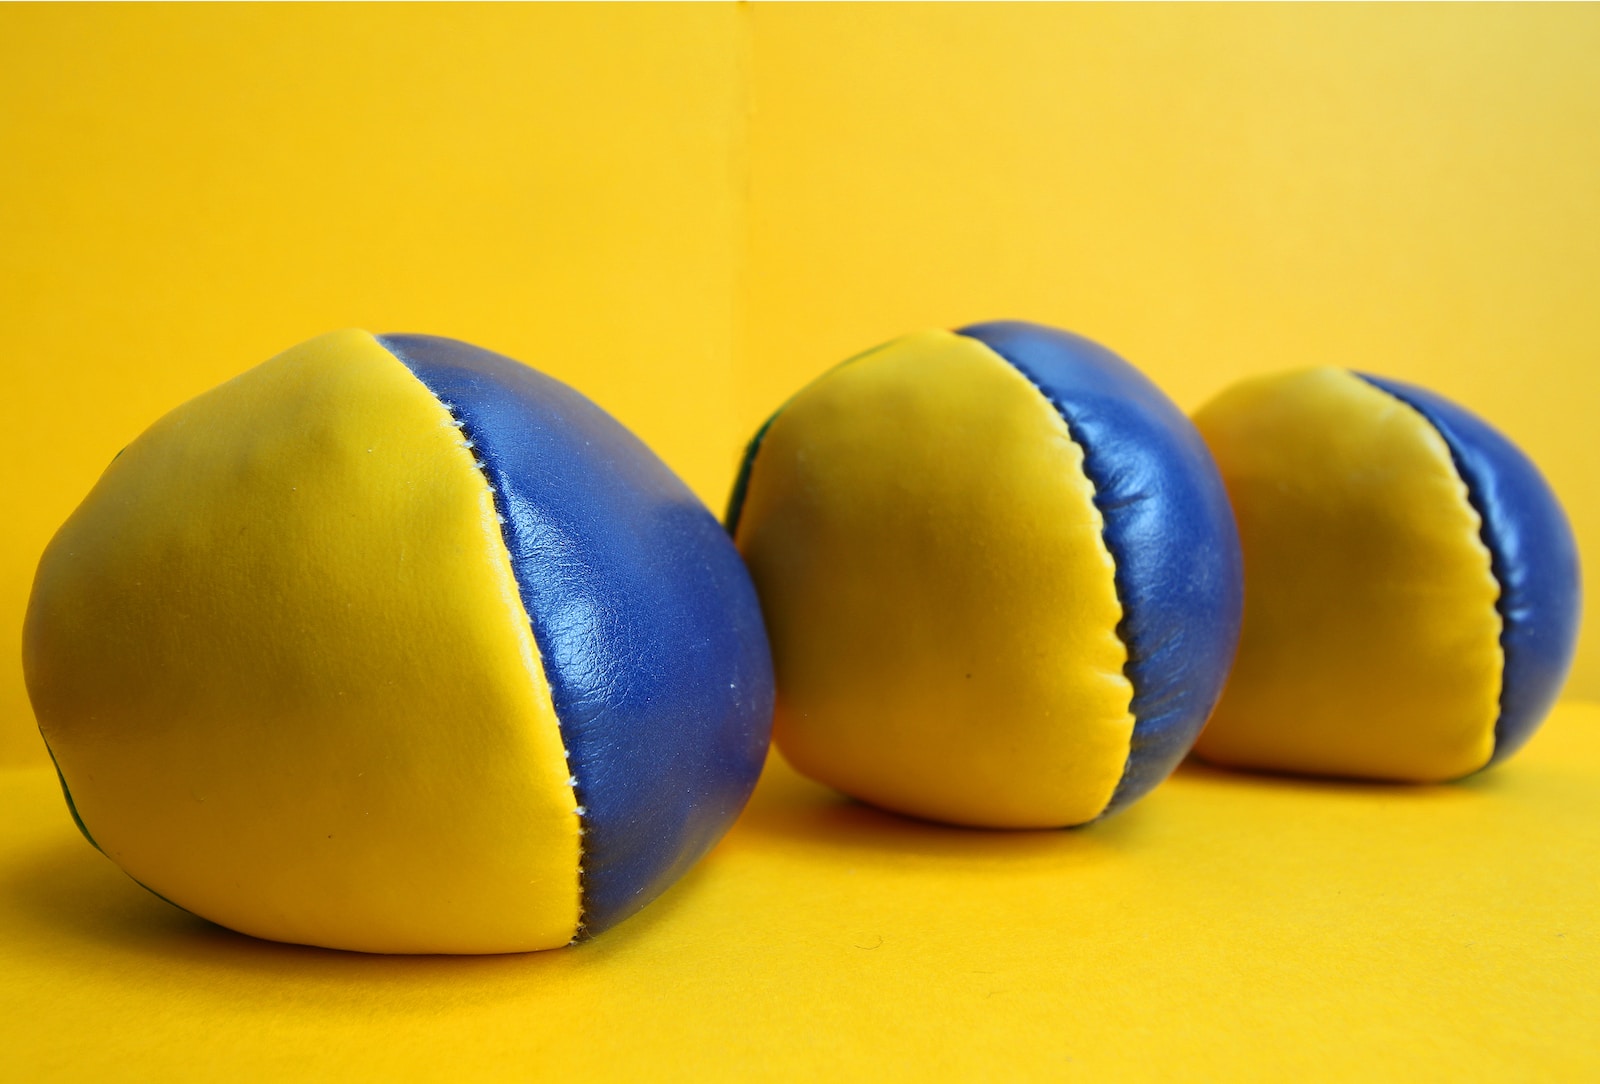 three blue and yellow balls on a yellow background